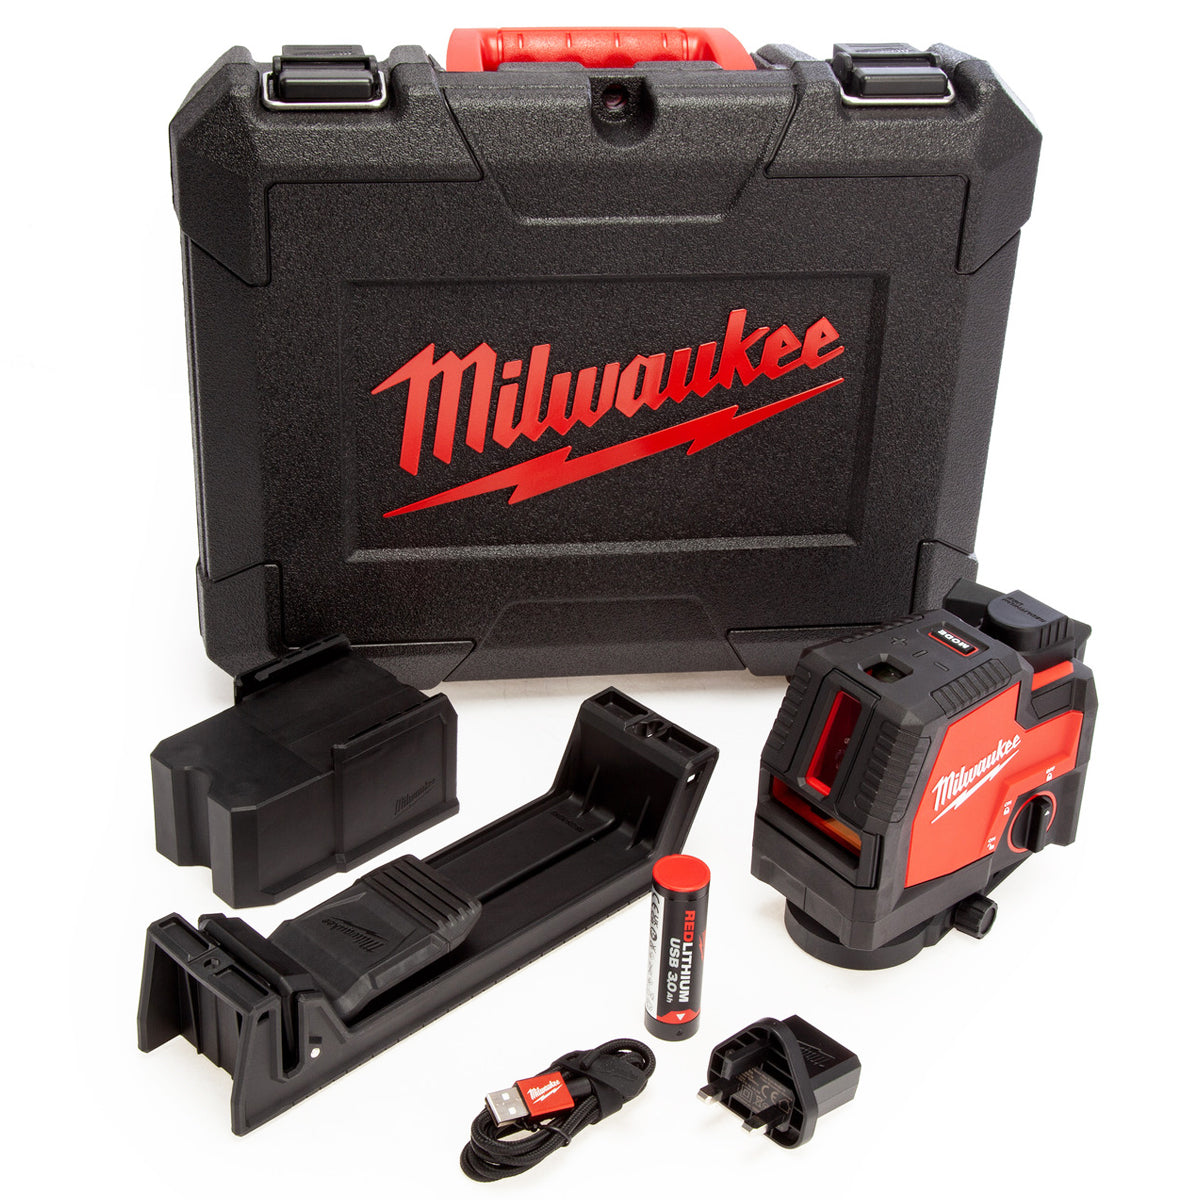 Milwaukee L4CLLP-301C Green Cross Line Laser with Plumb Points 4933478244